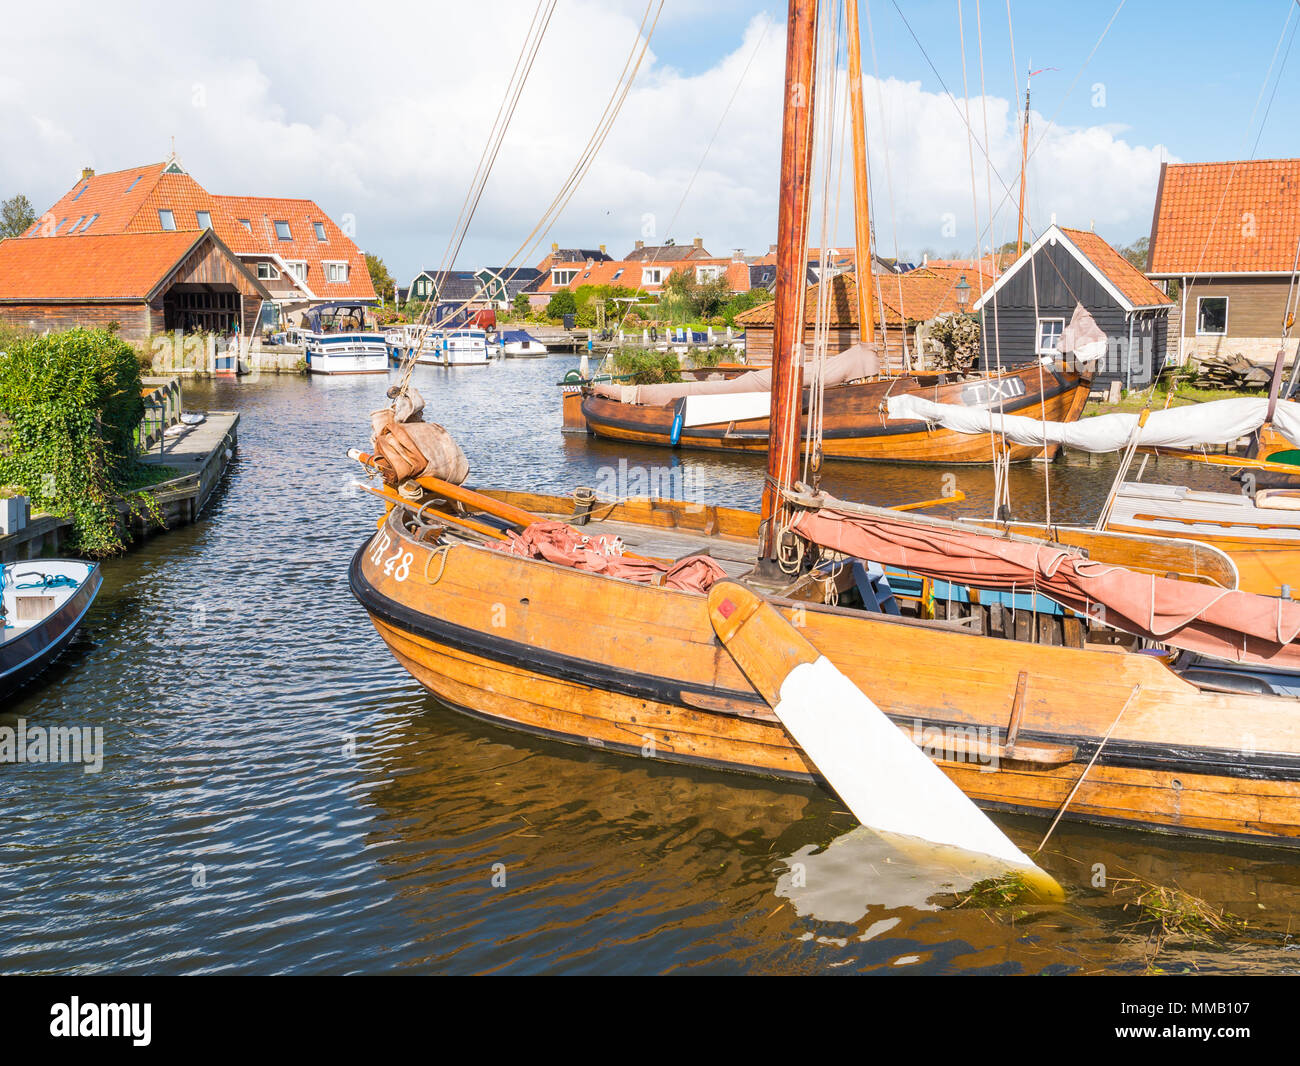 Traditional flatbottom fishing boats moored in shipyard Blazerhaven in historic town of Workum, Friesland, Netherlands Stock Photo